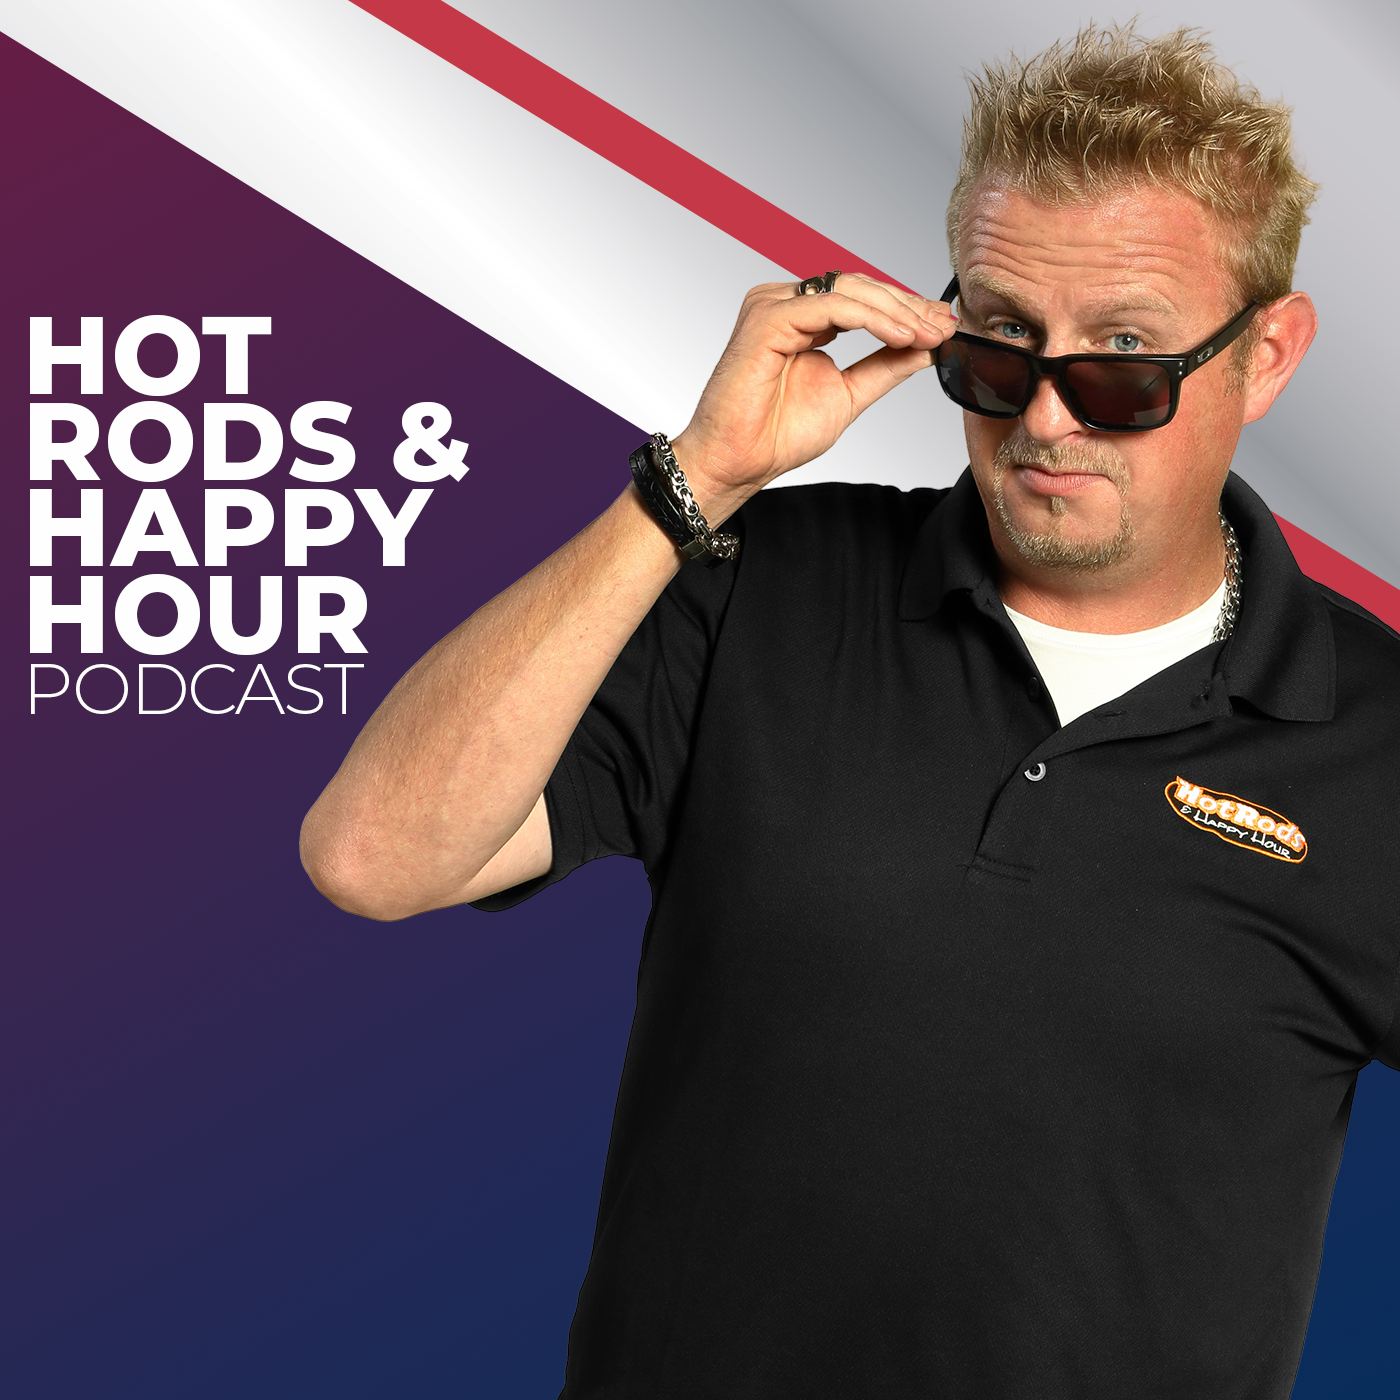 HOT RODS 2 24 19 HOUR 1 